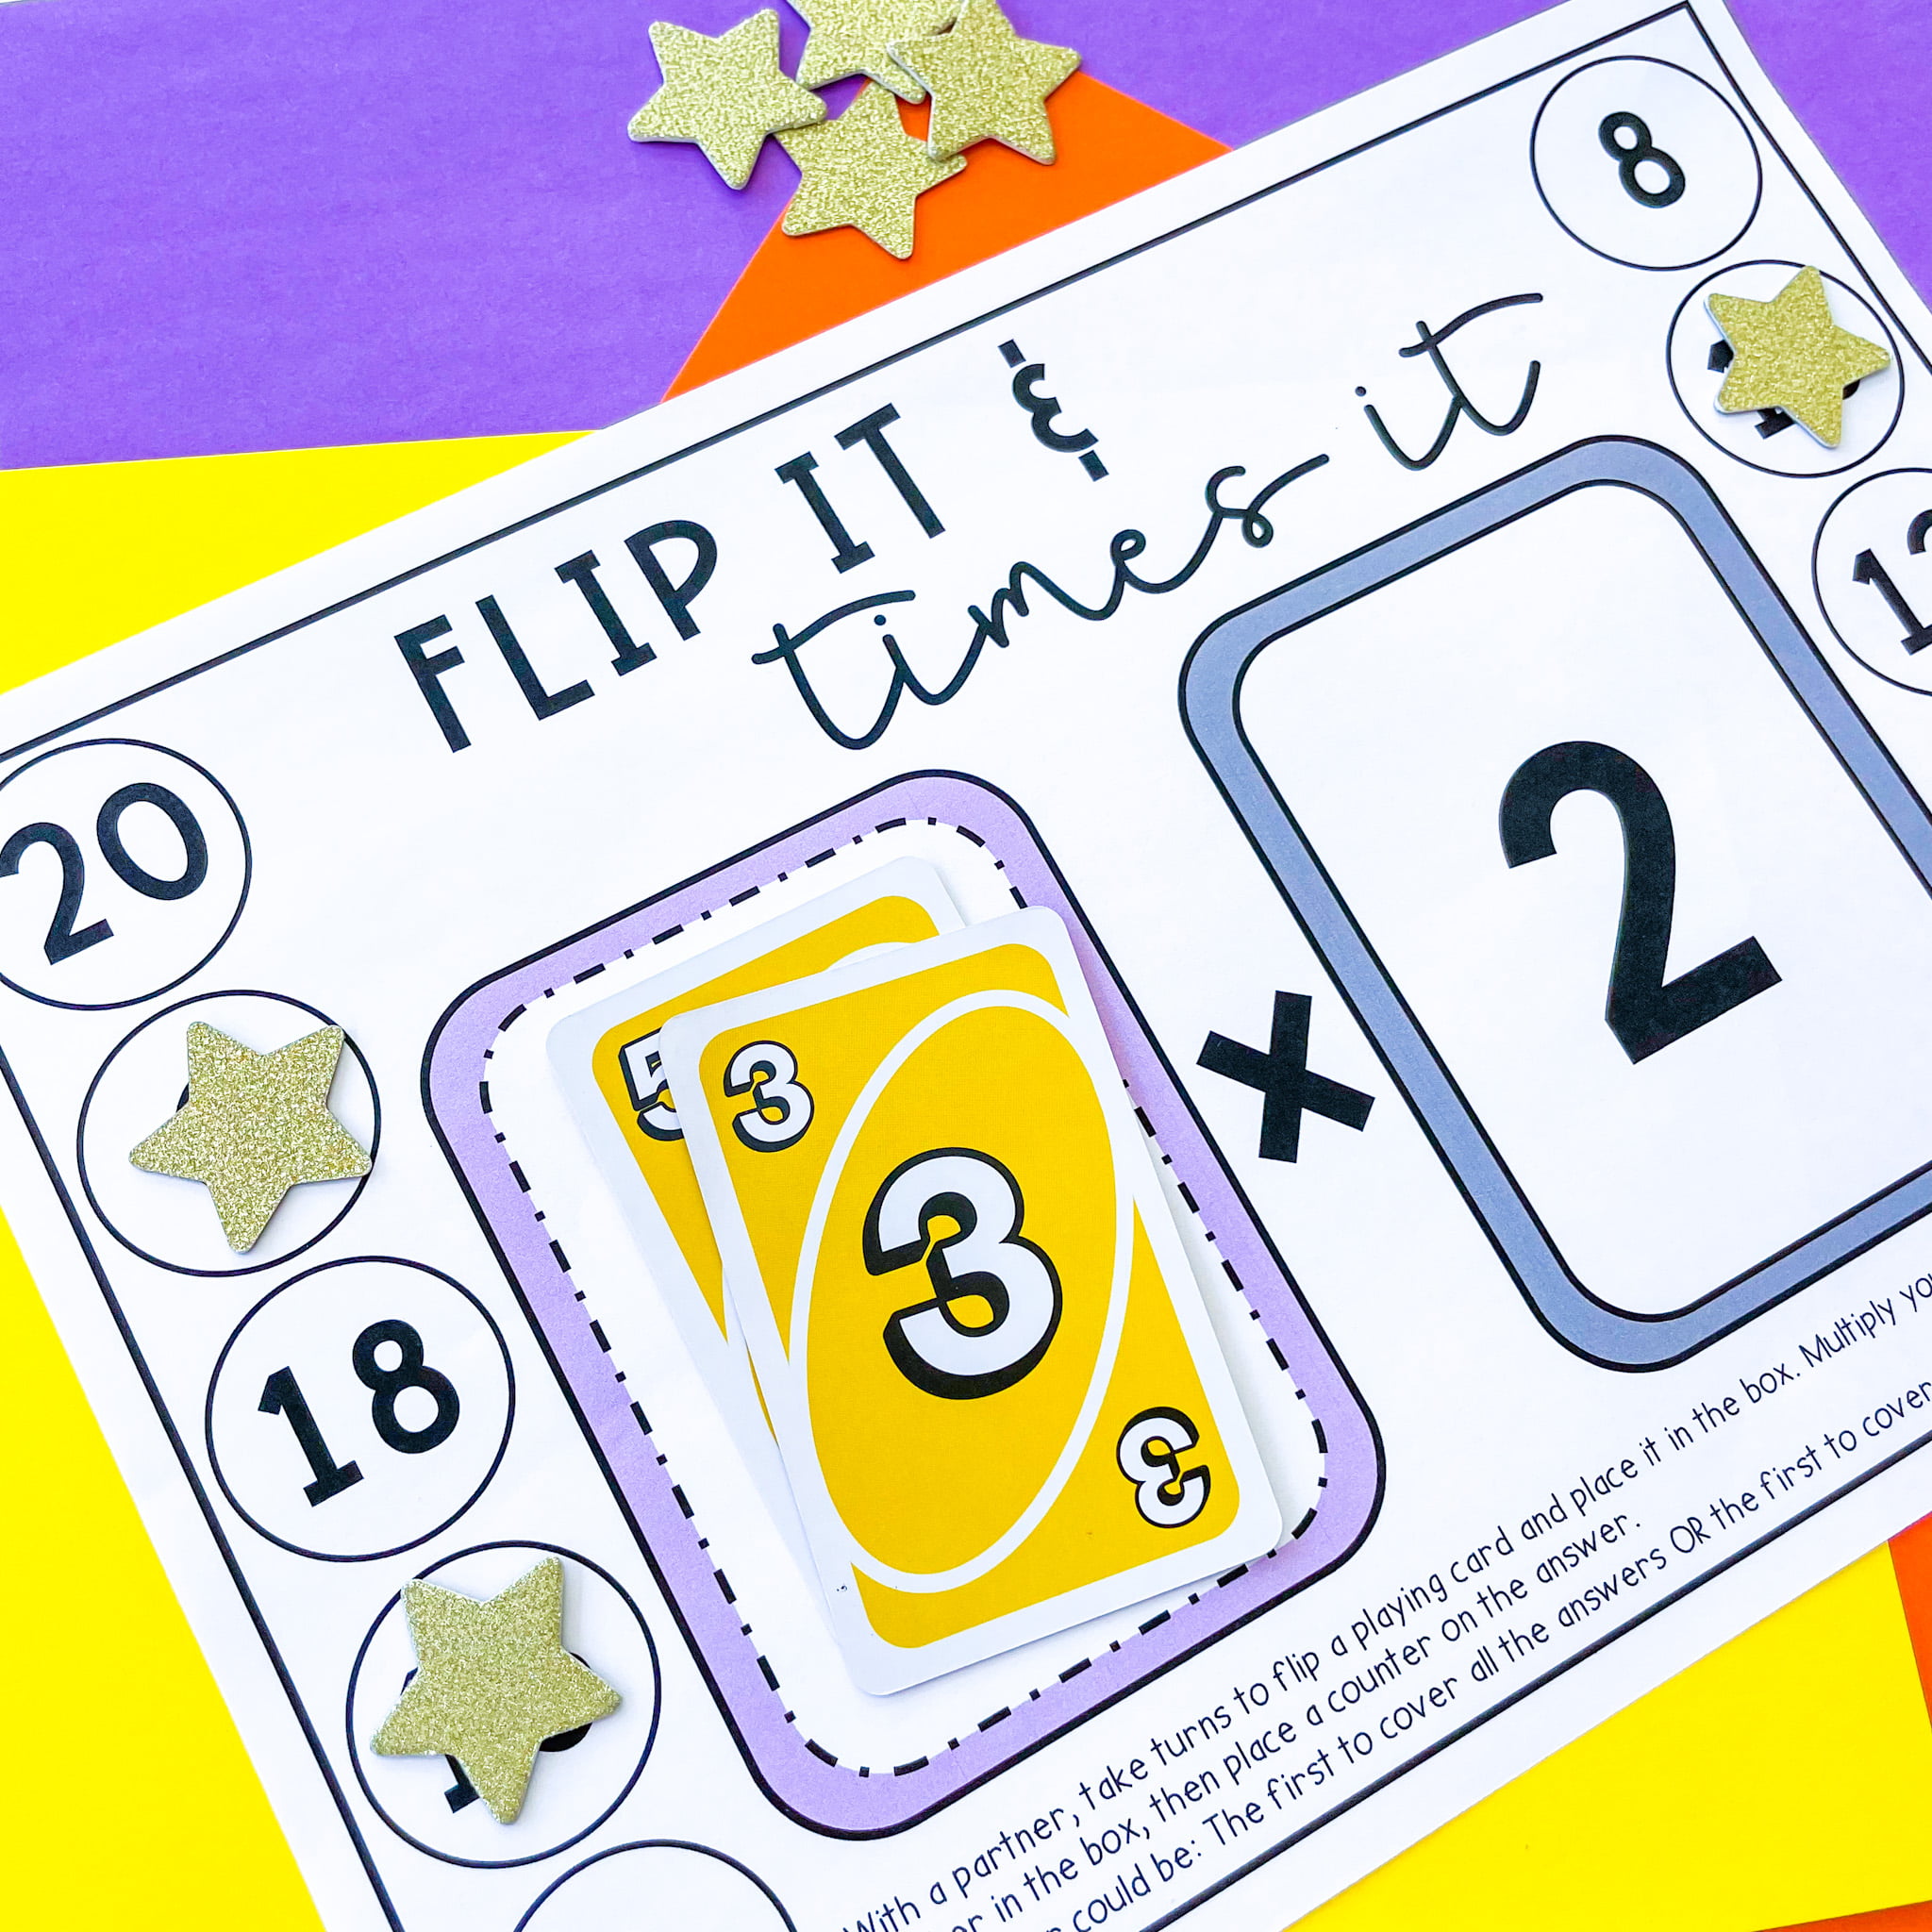 Flip-it-and-times-it-free-game